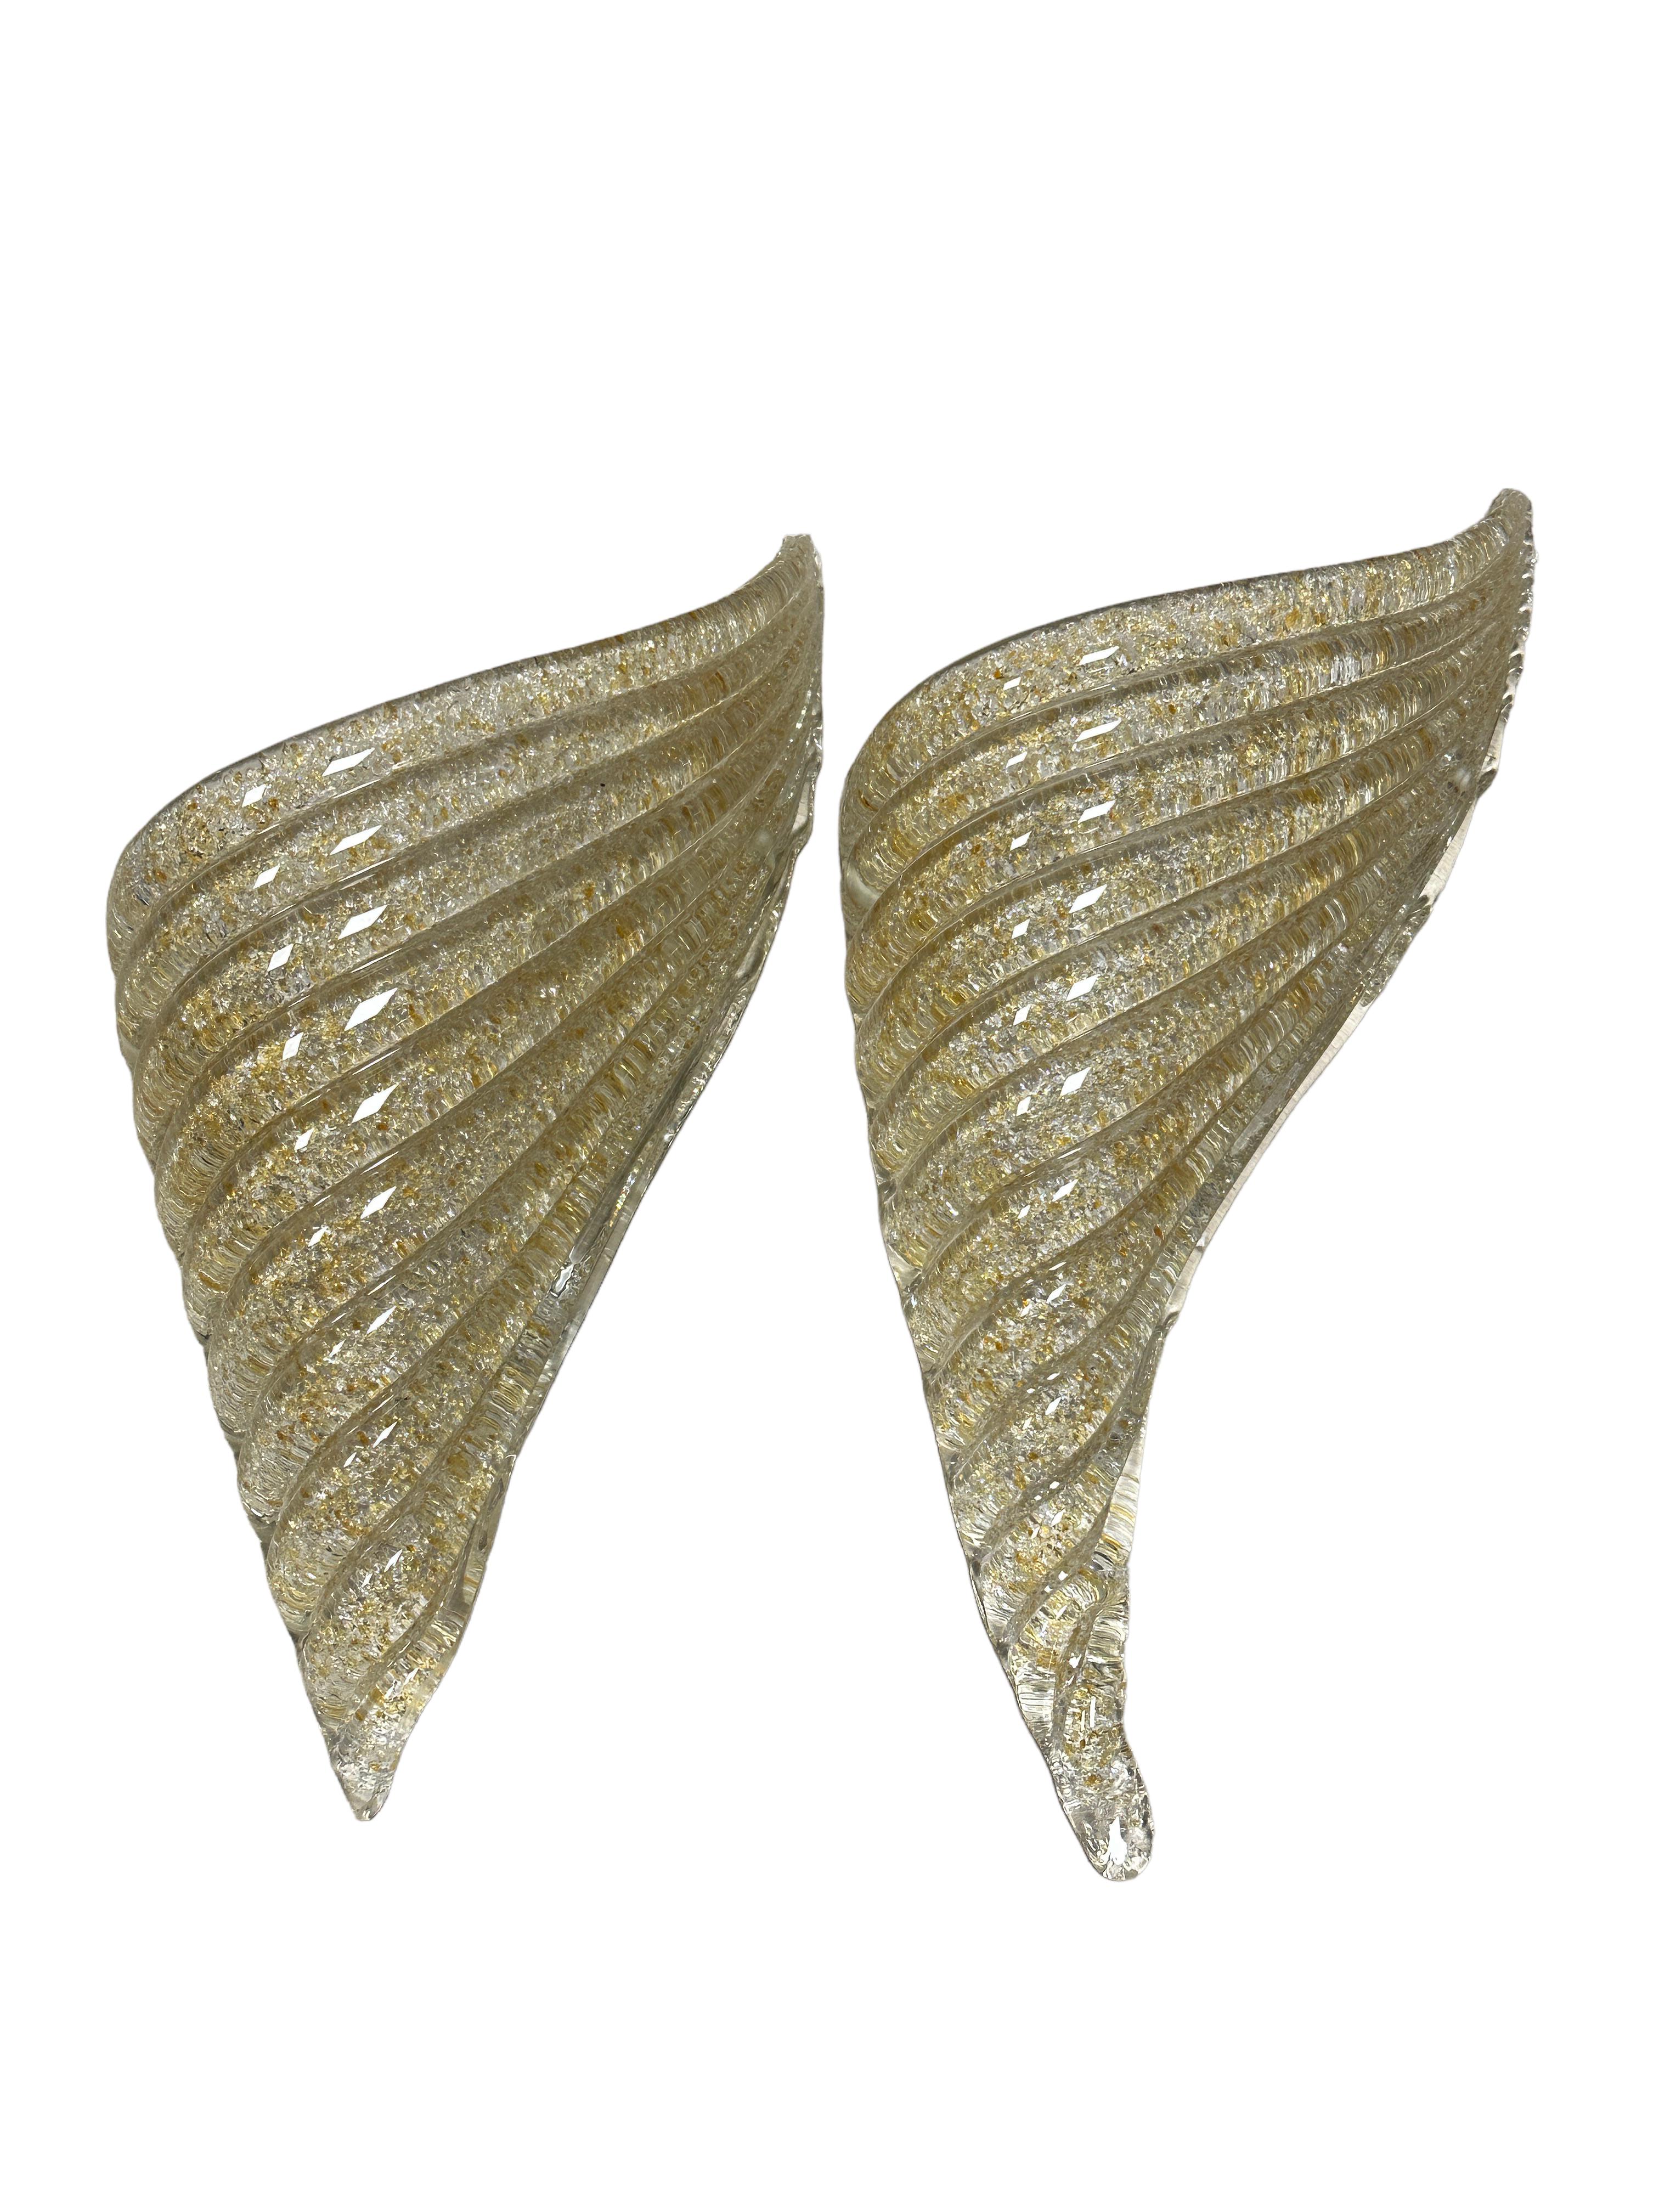 Mid-Century Modern Stunning Pair of Brass and Murano Glass Cornucopia Shell Sconces, Italy, 1980s For Sale